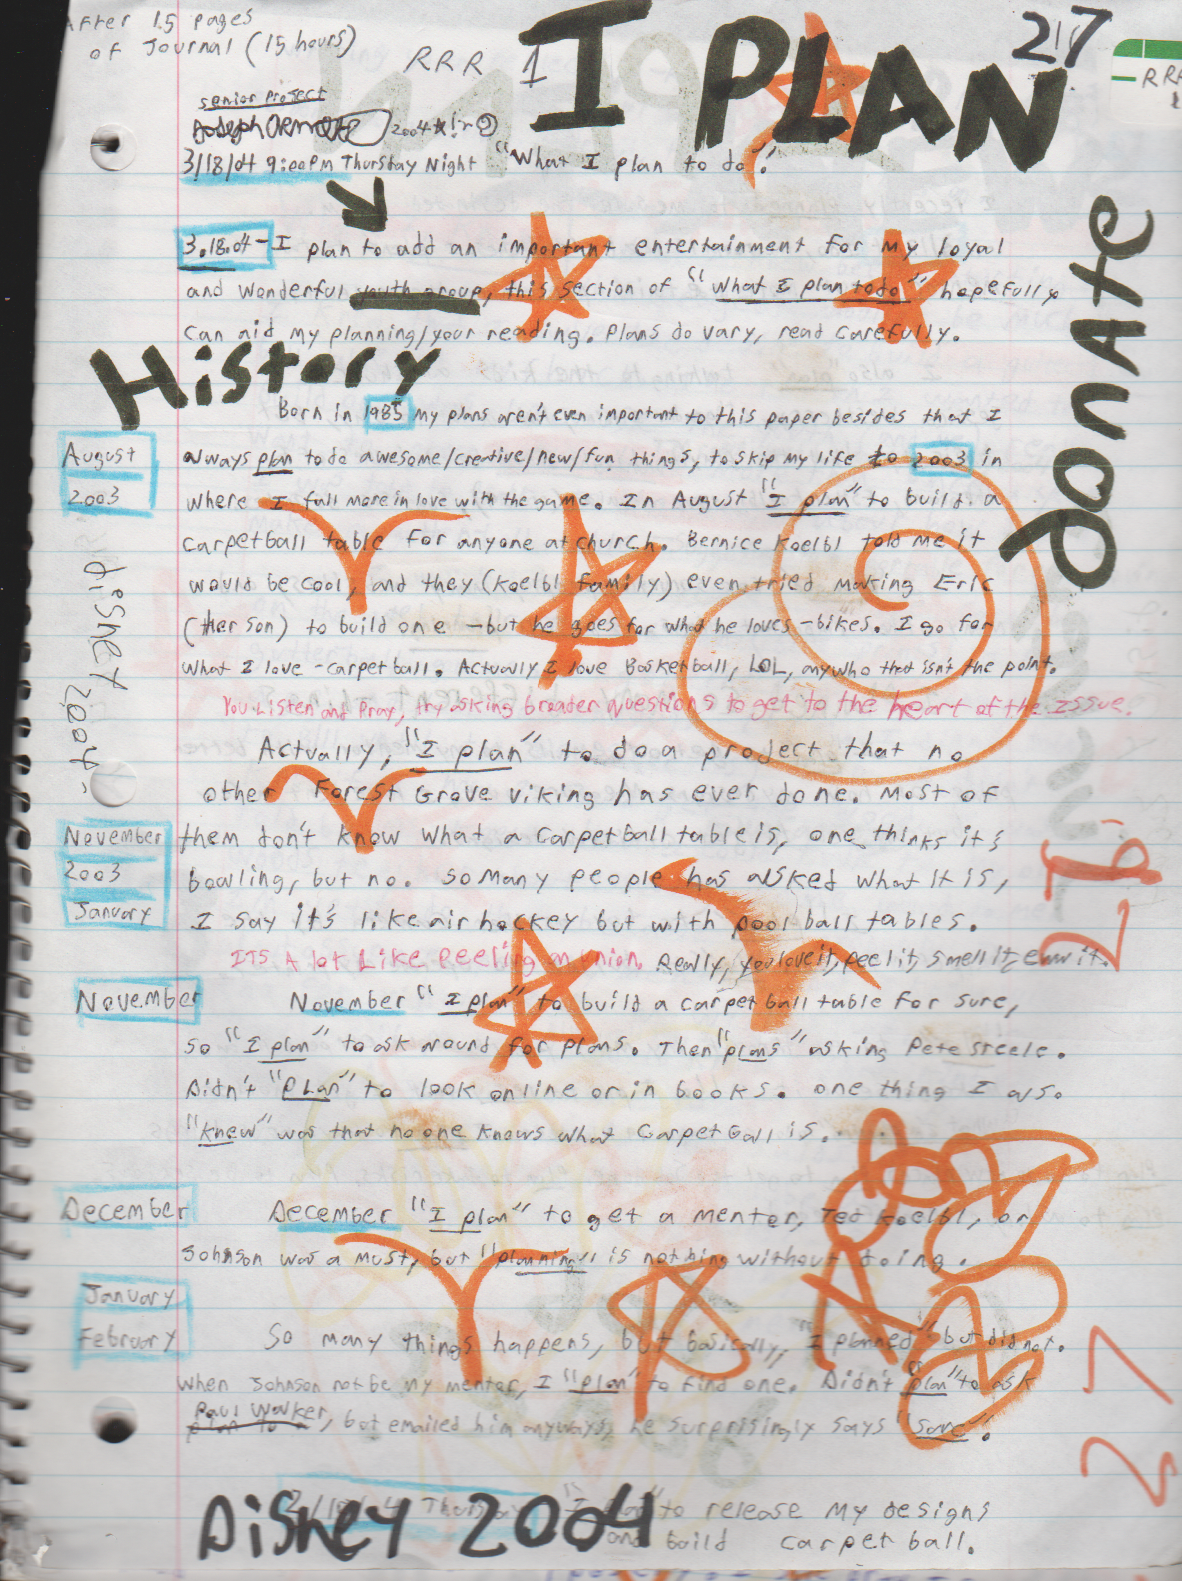 2004-01-29 - Thursday - Carpetball FGHS Senior Project Journal, Joey Arnold, Part 02, 96pages numbered, Notebook-22.png